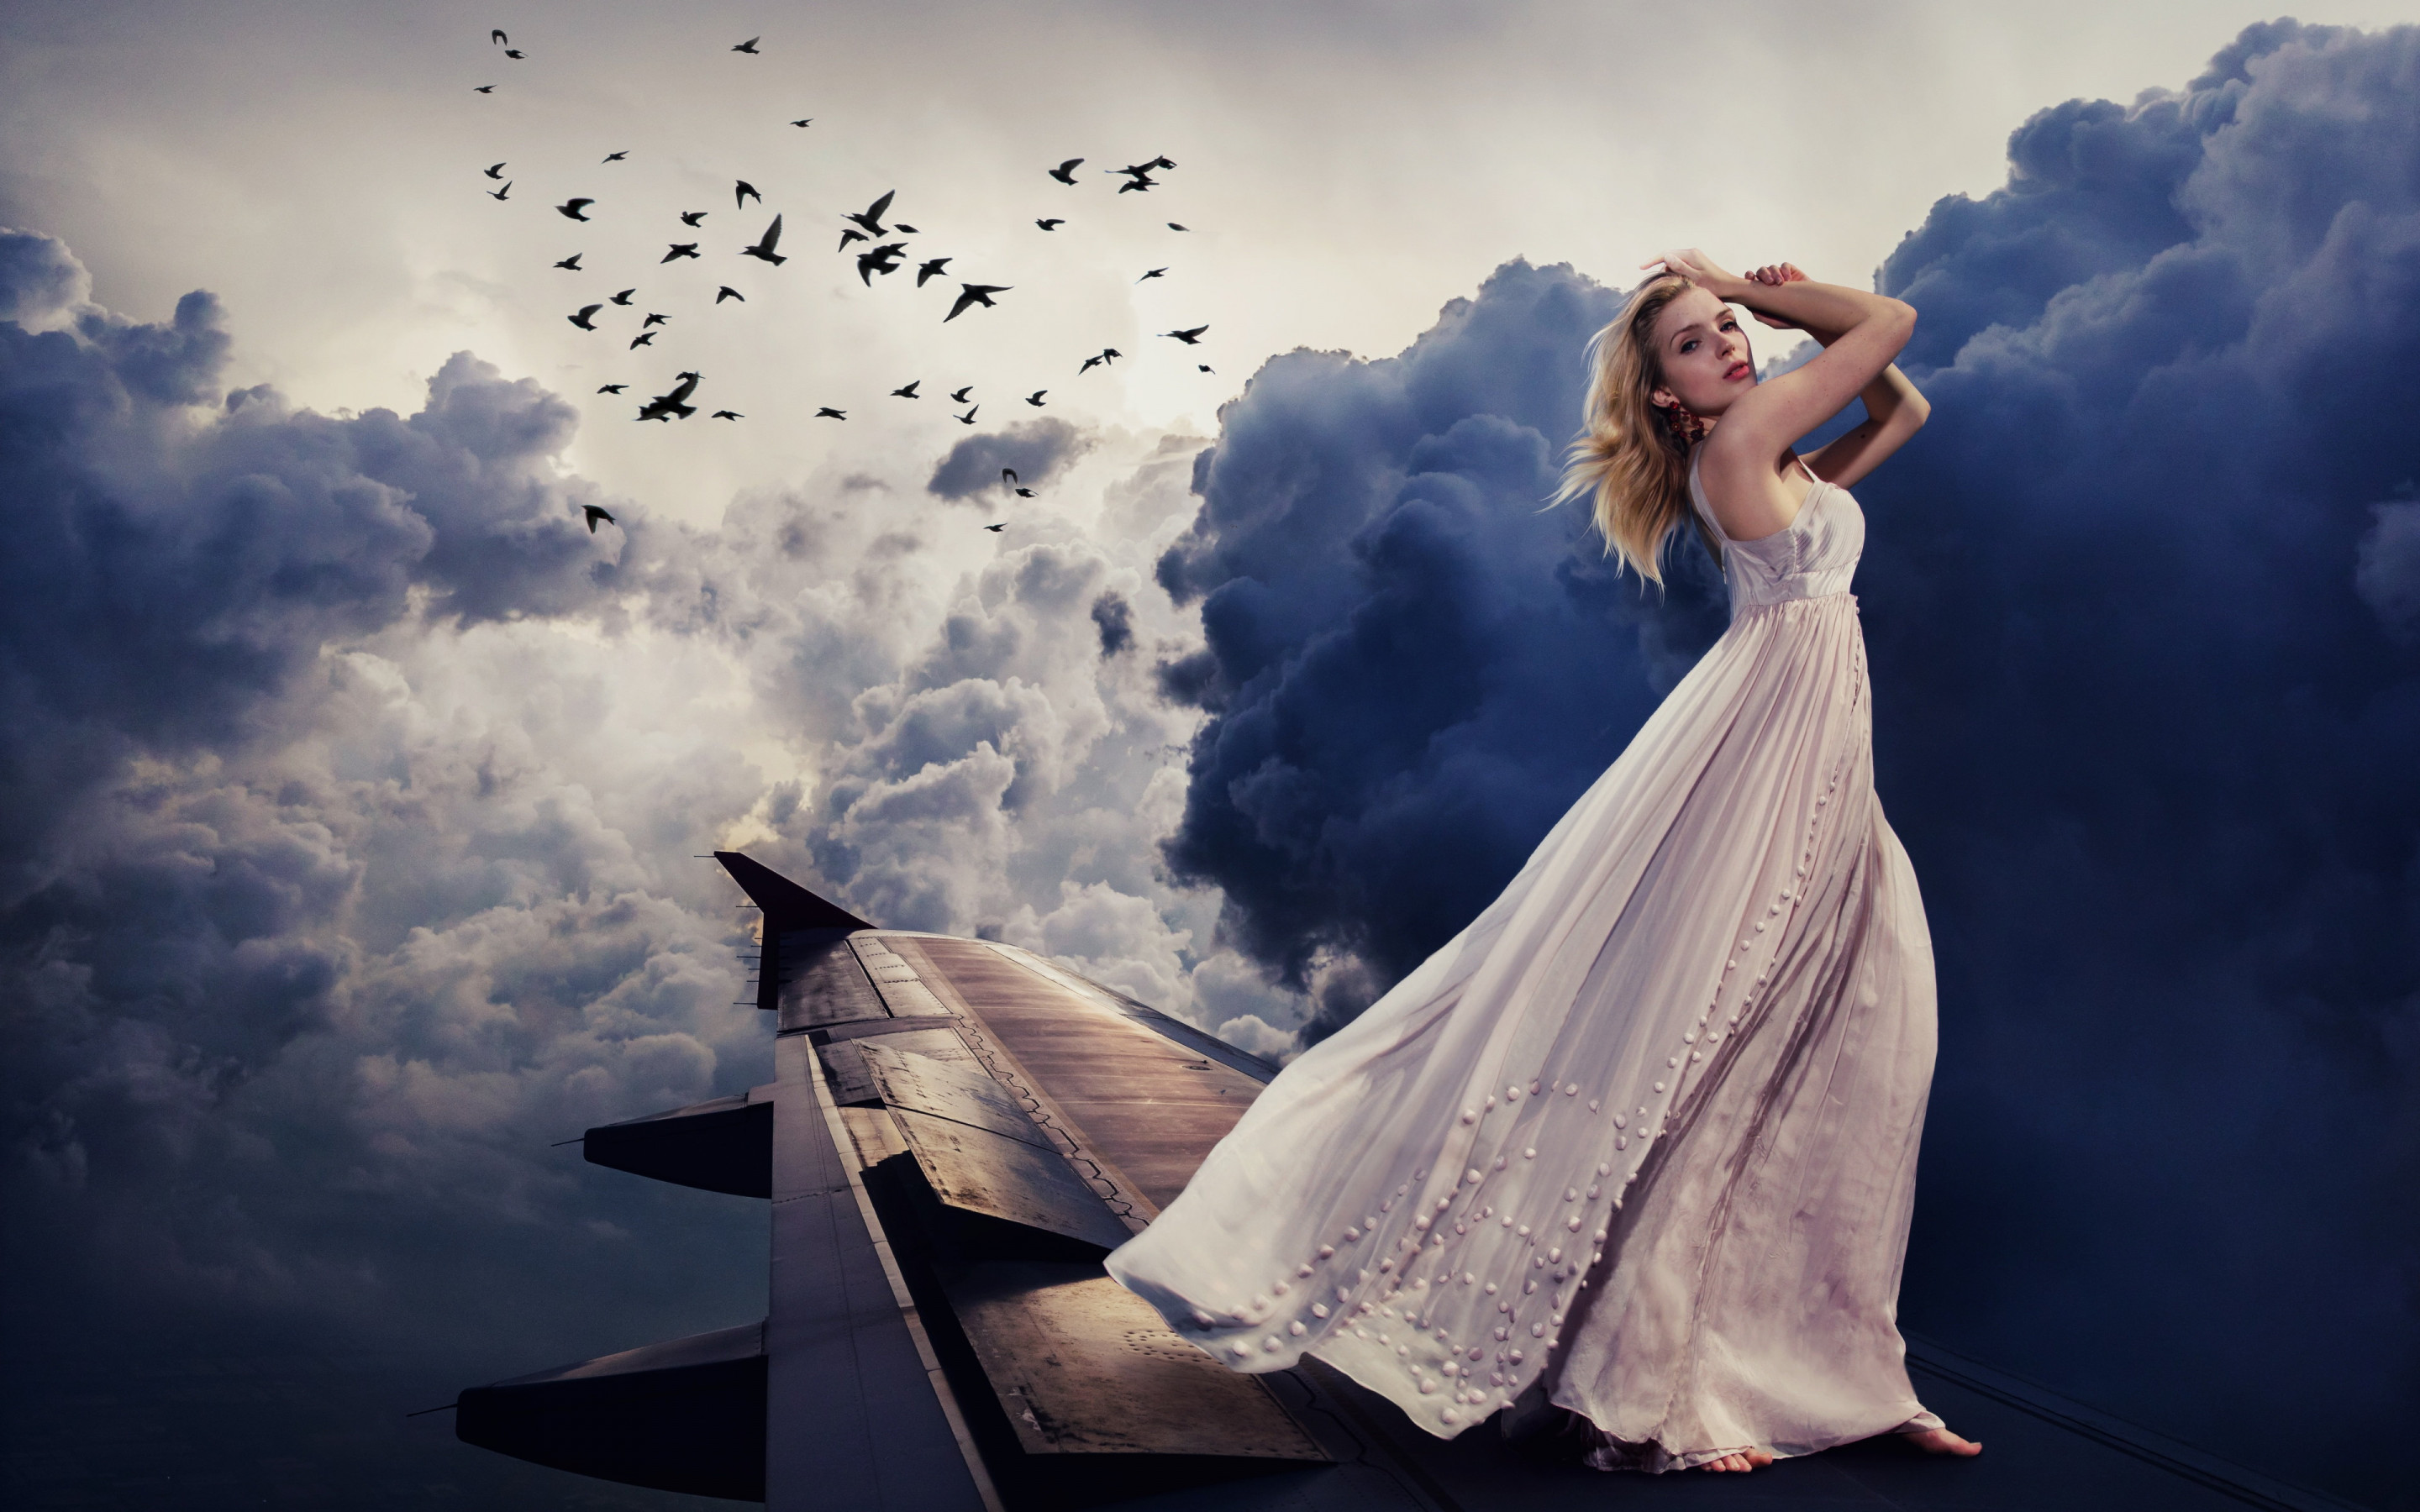 Beautiful girl on the airplane wing wallpaper 2880x1800